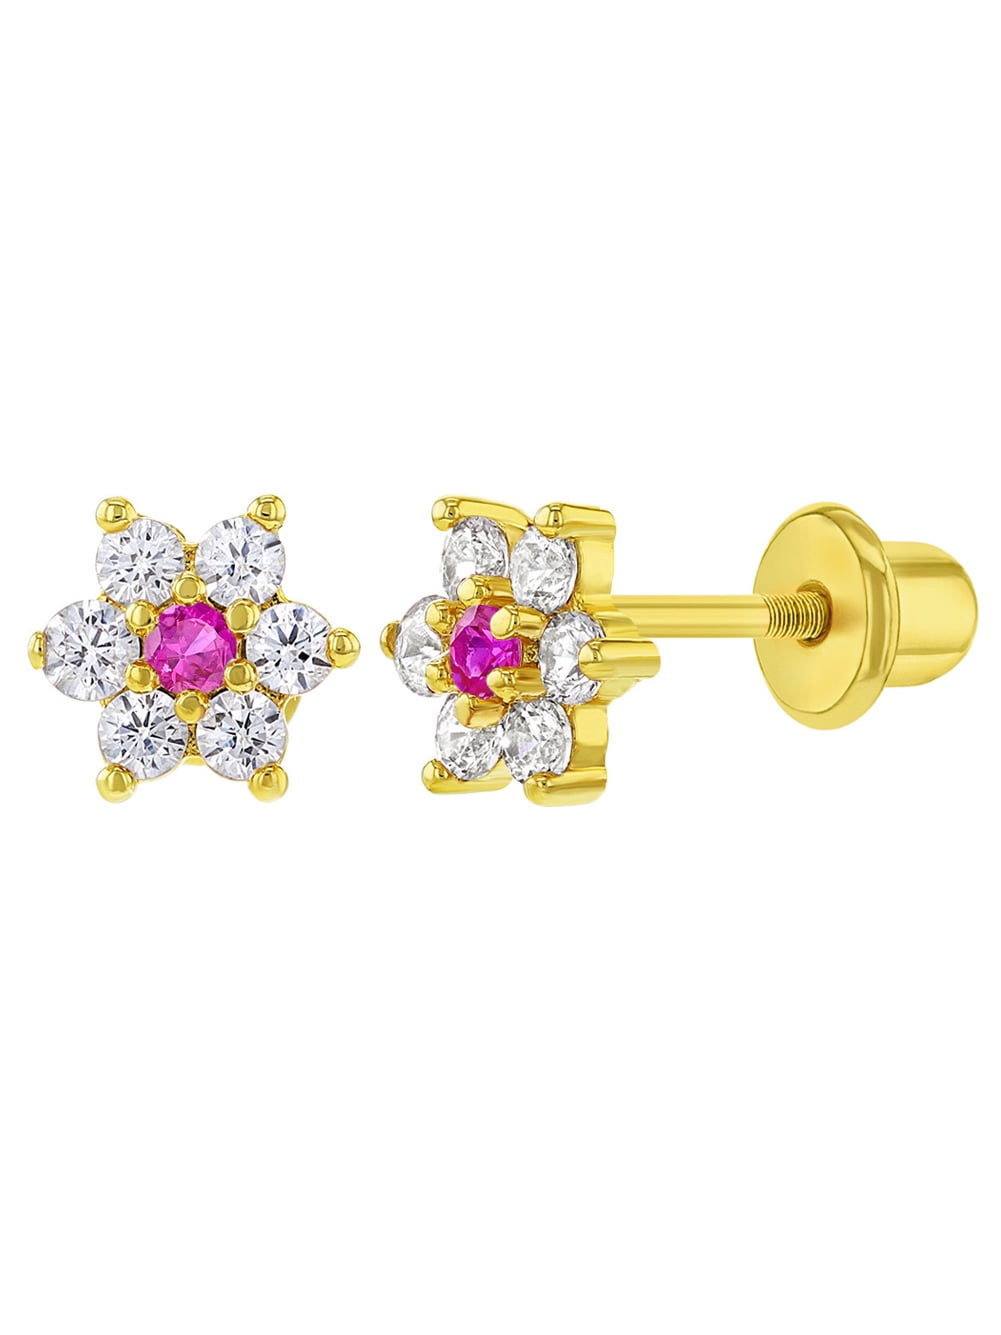 Jewelry, 18 Karat Gold Not Plated Lv Blossom Earrings